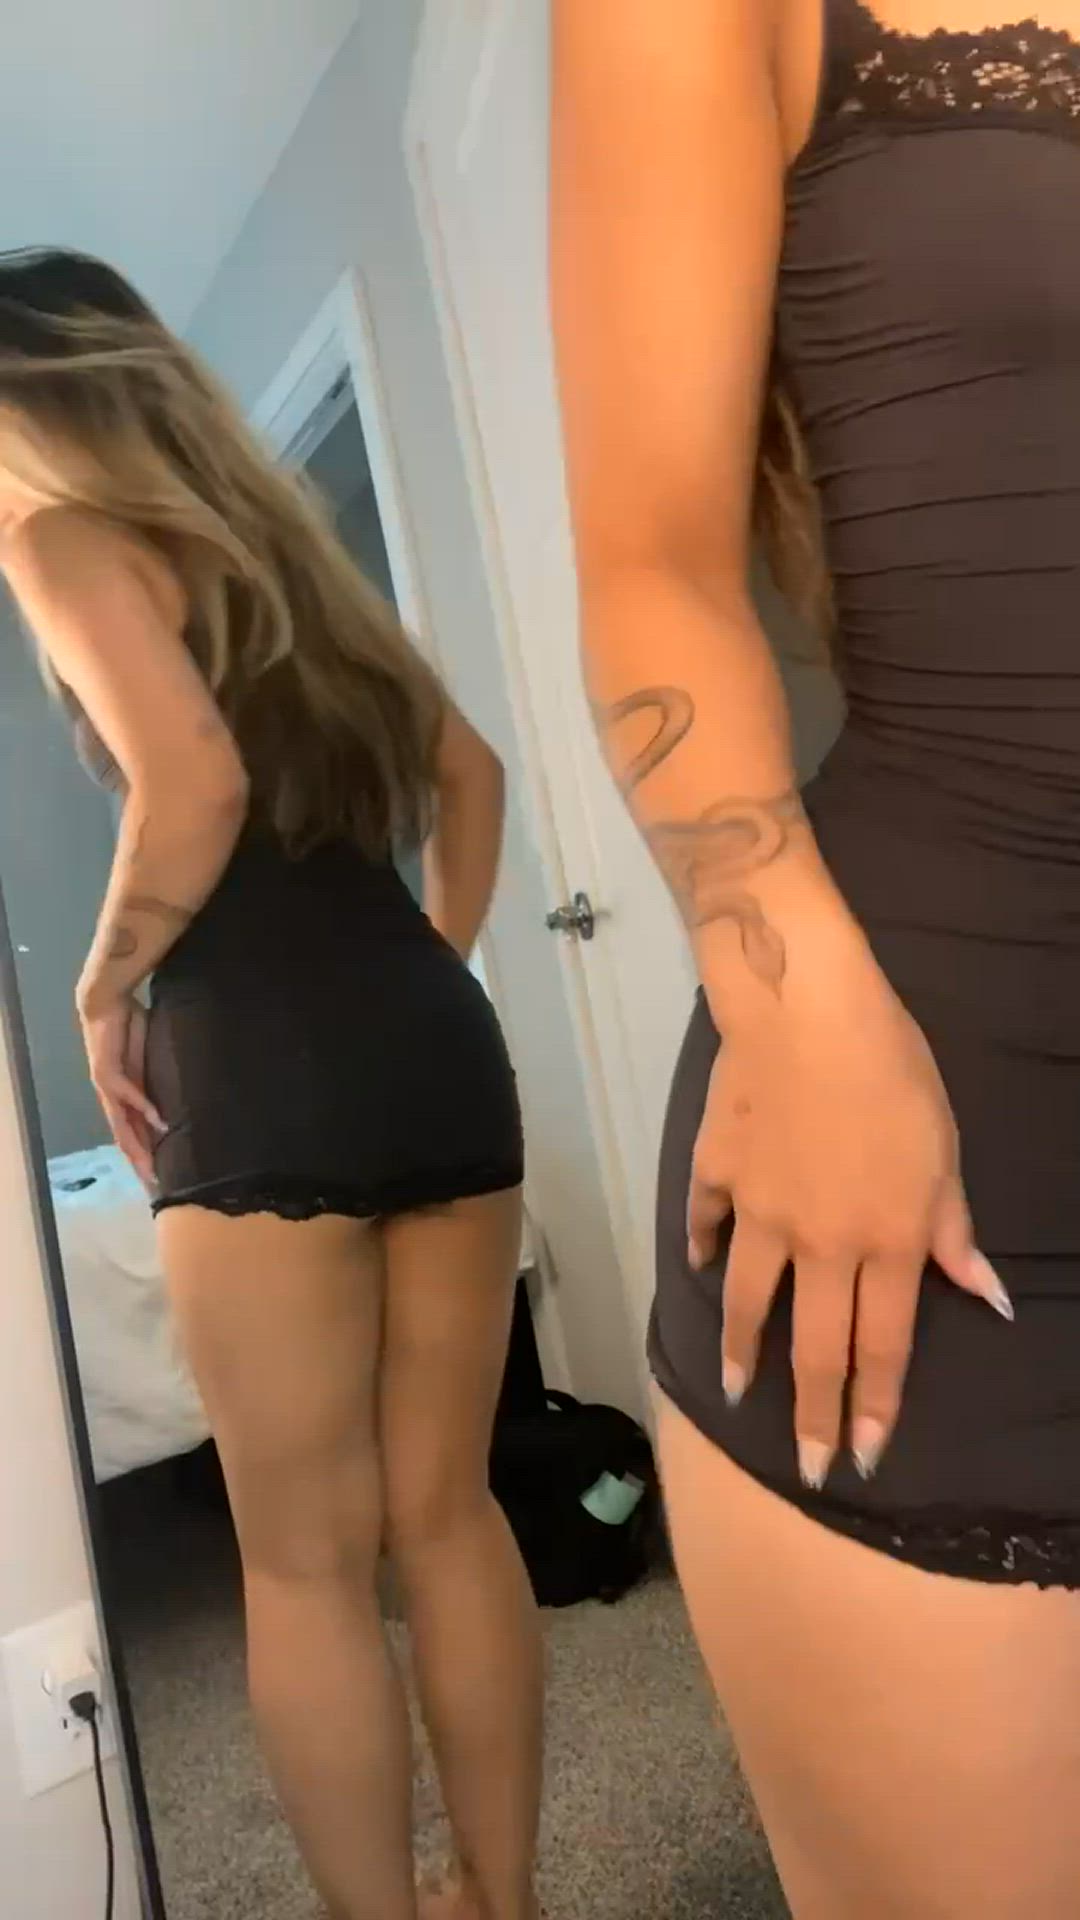 Ass porn video with onlyfans model bunnybabymo <strong>@bunnybabymo</strong>